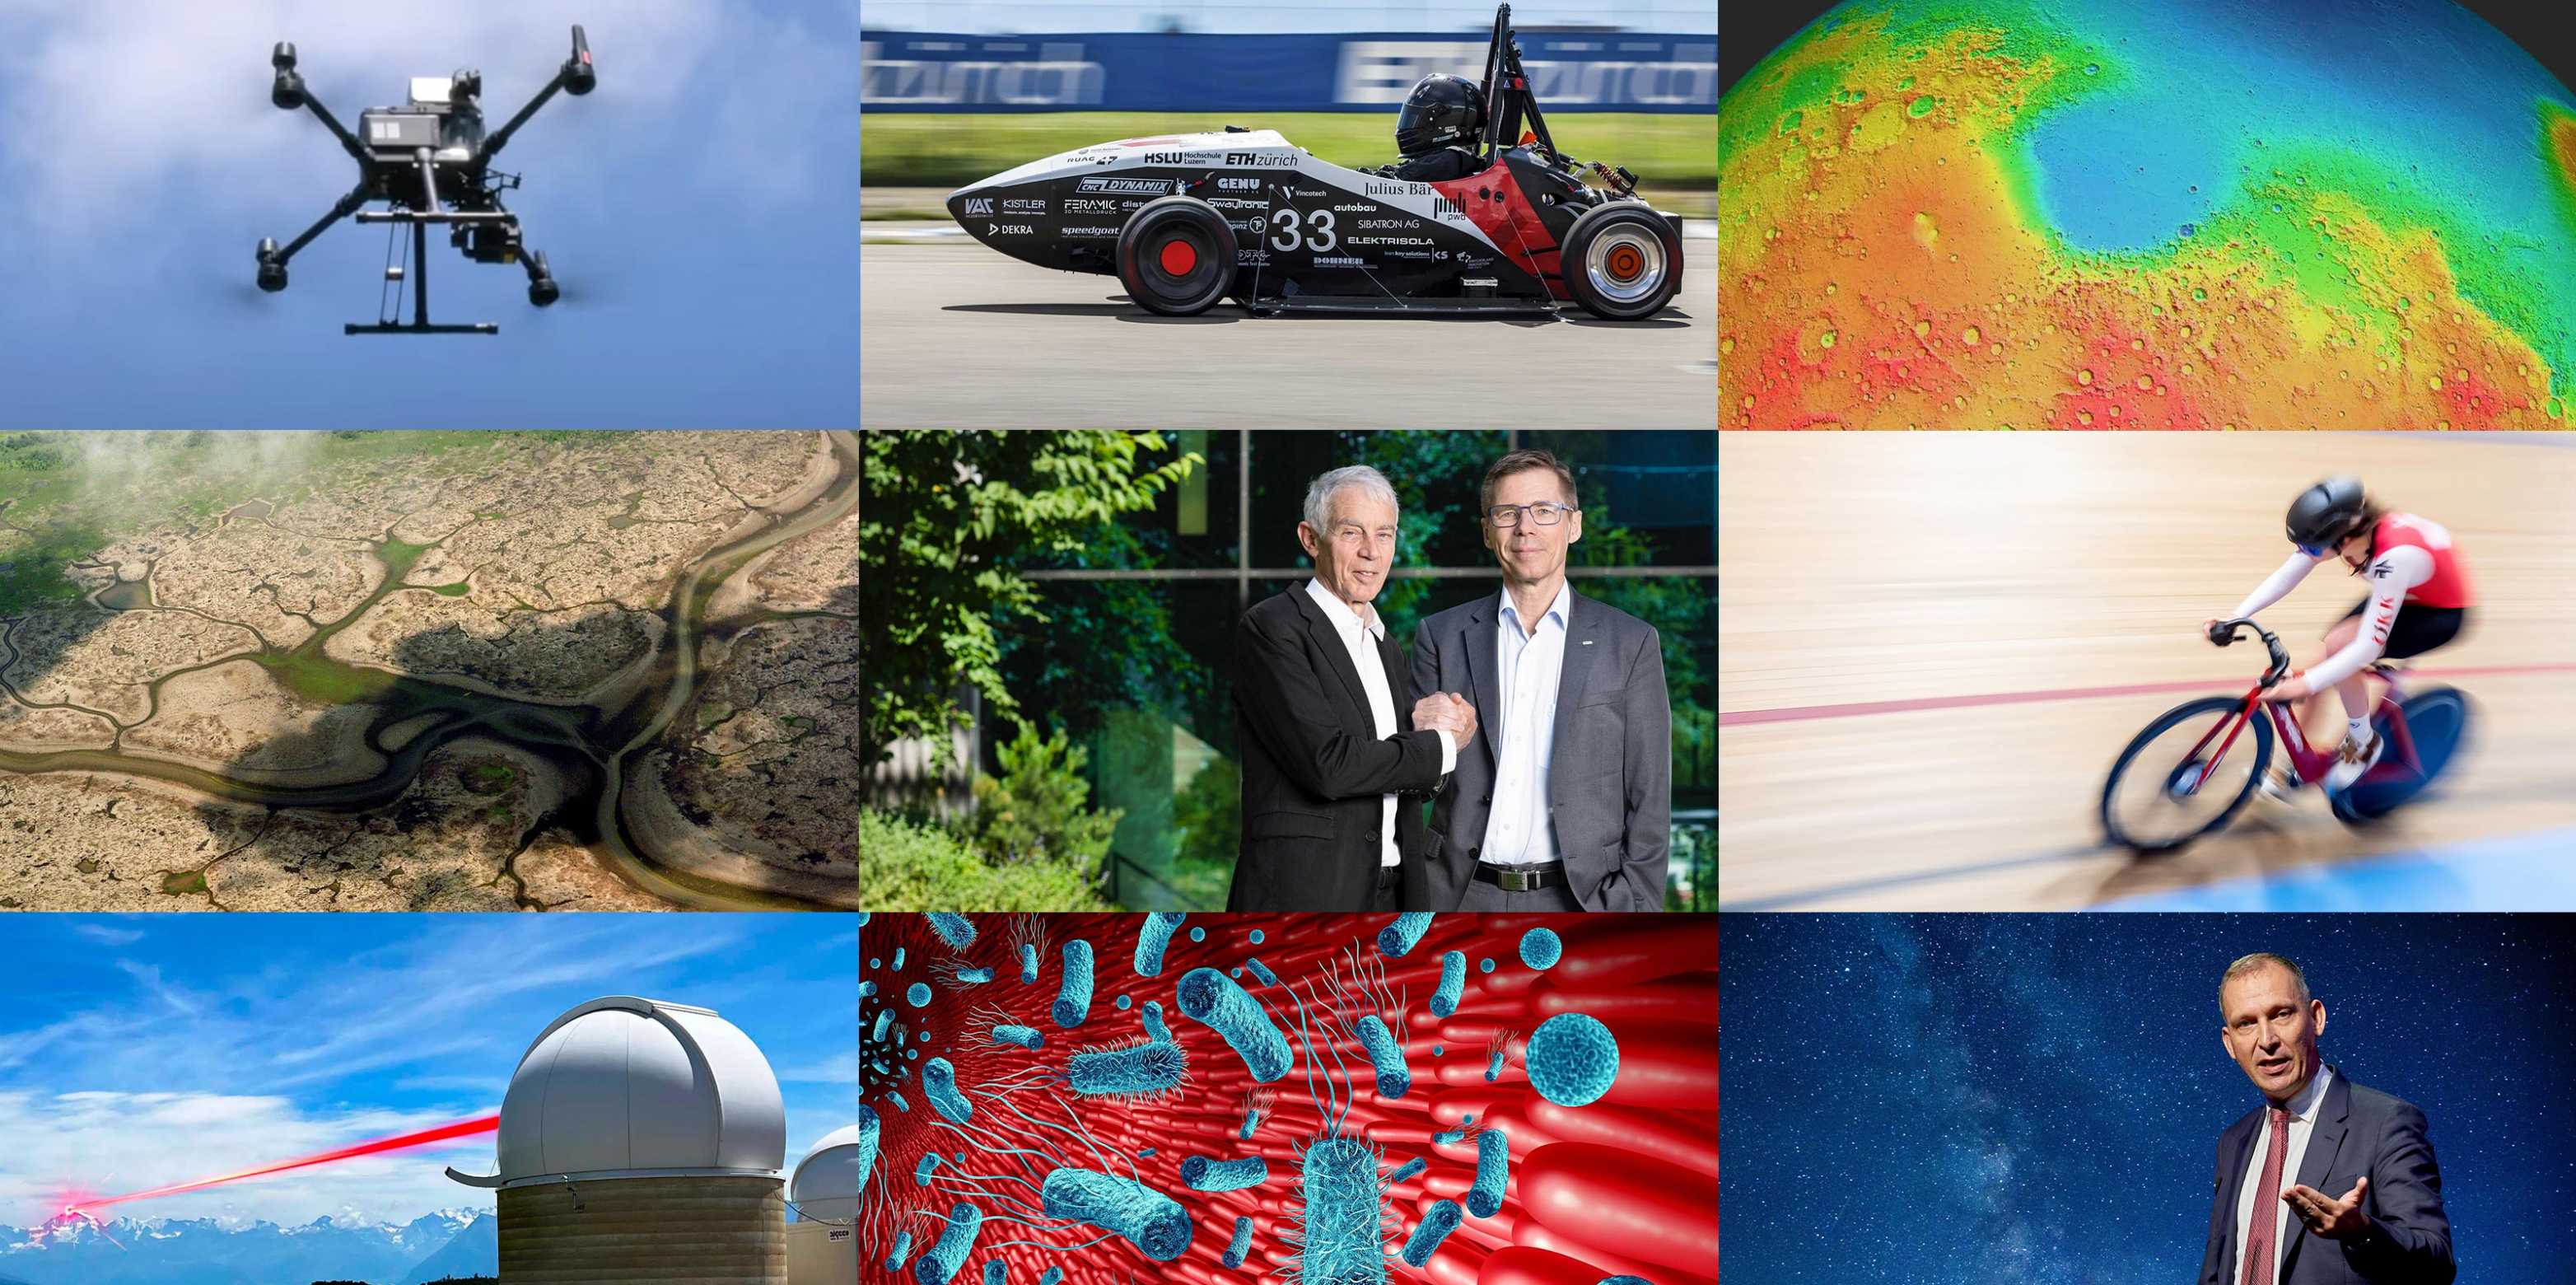 Photomontage with important events and research results at ETH Zurich